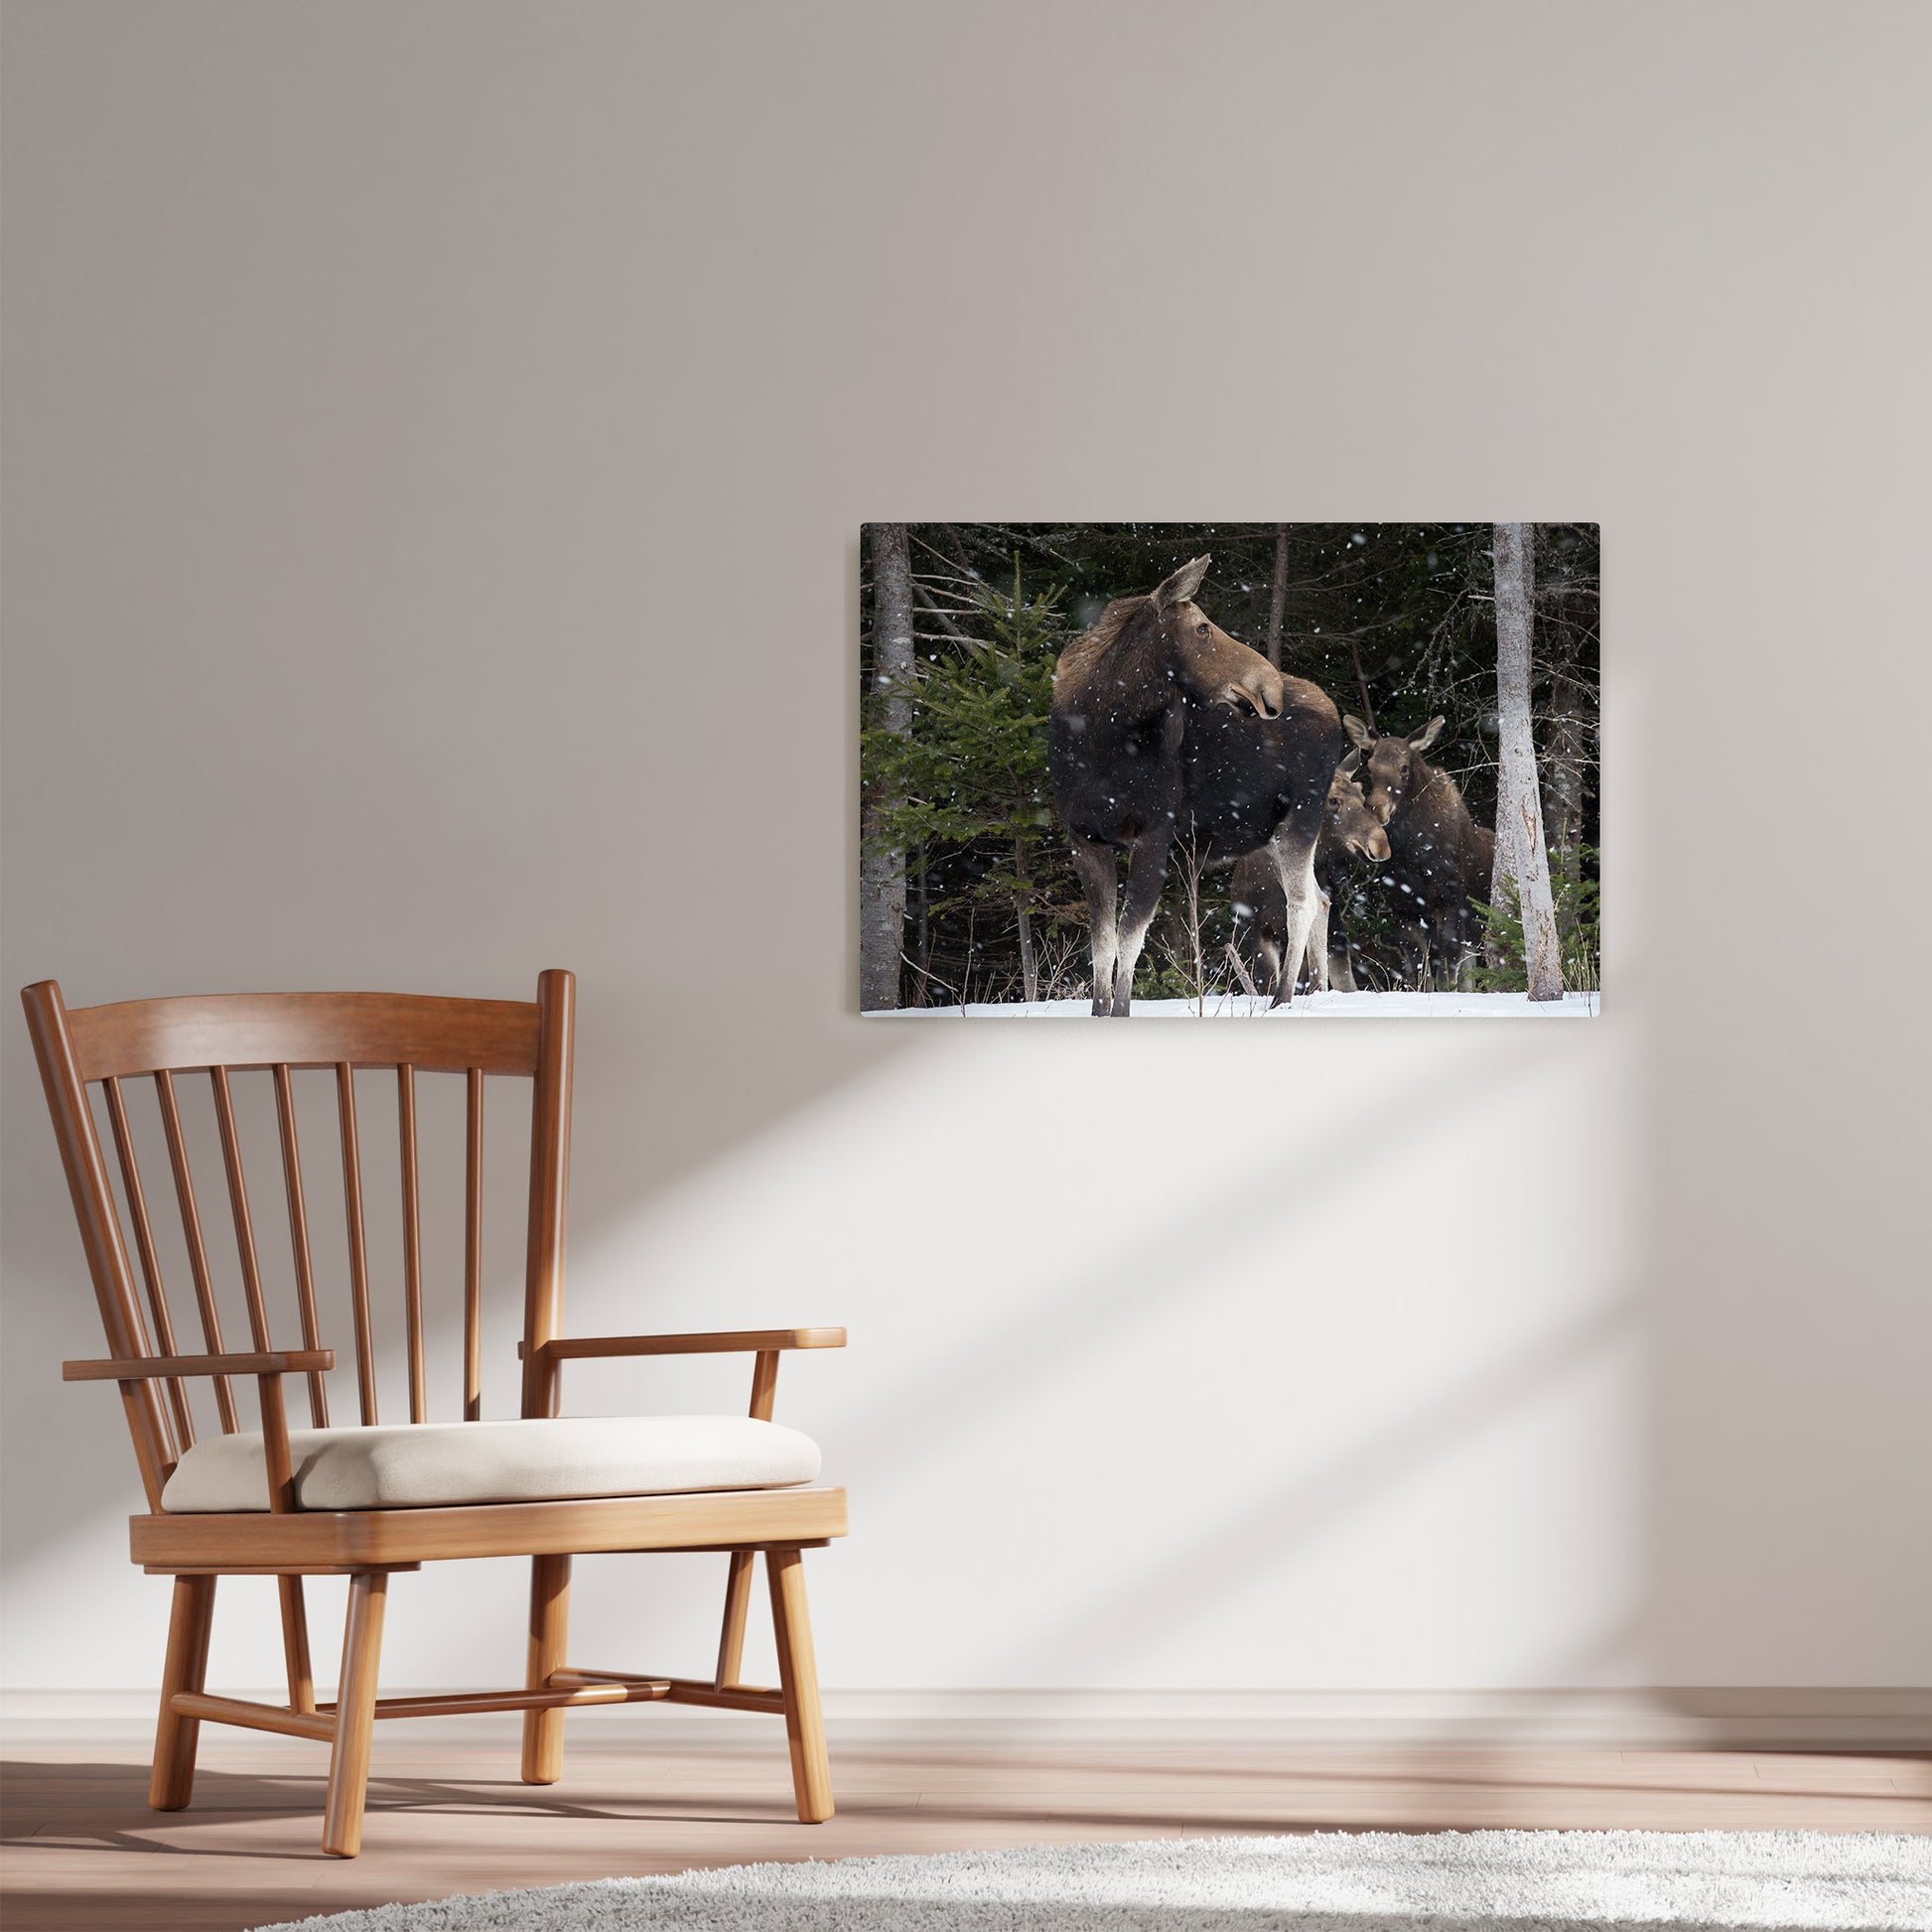 Ray Mackey's Moose Twins photography reproduced on HD metal print and displayed on wall